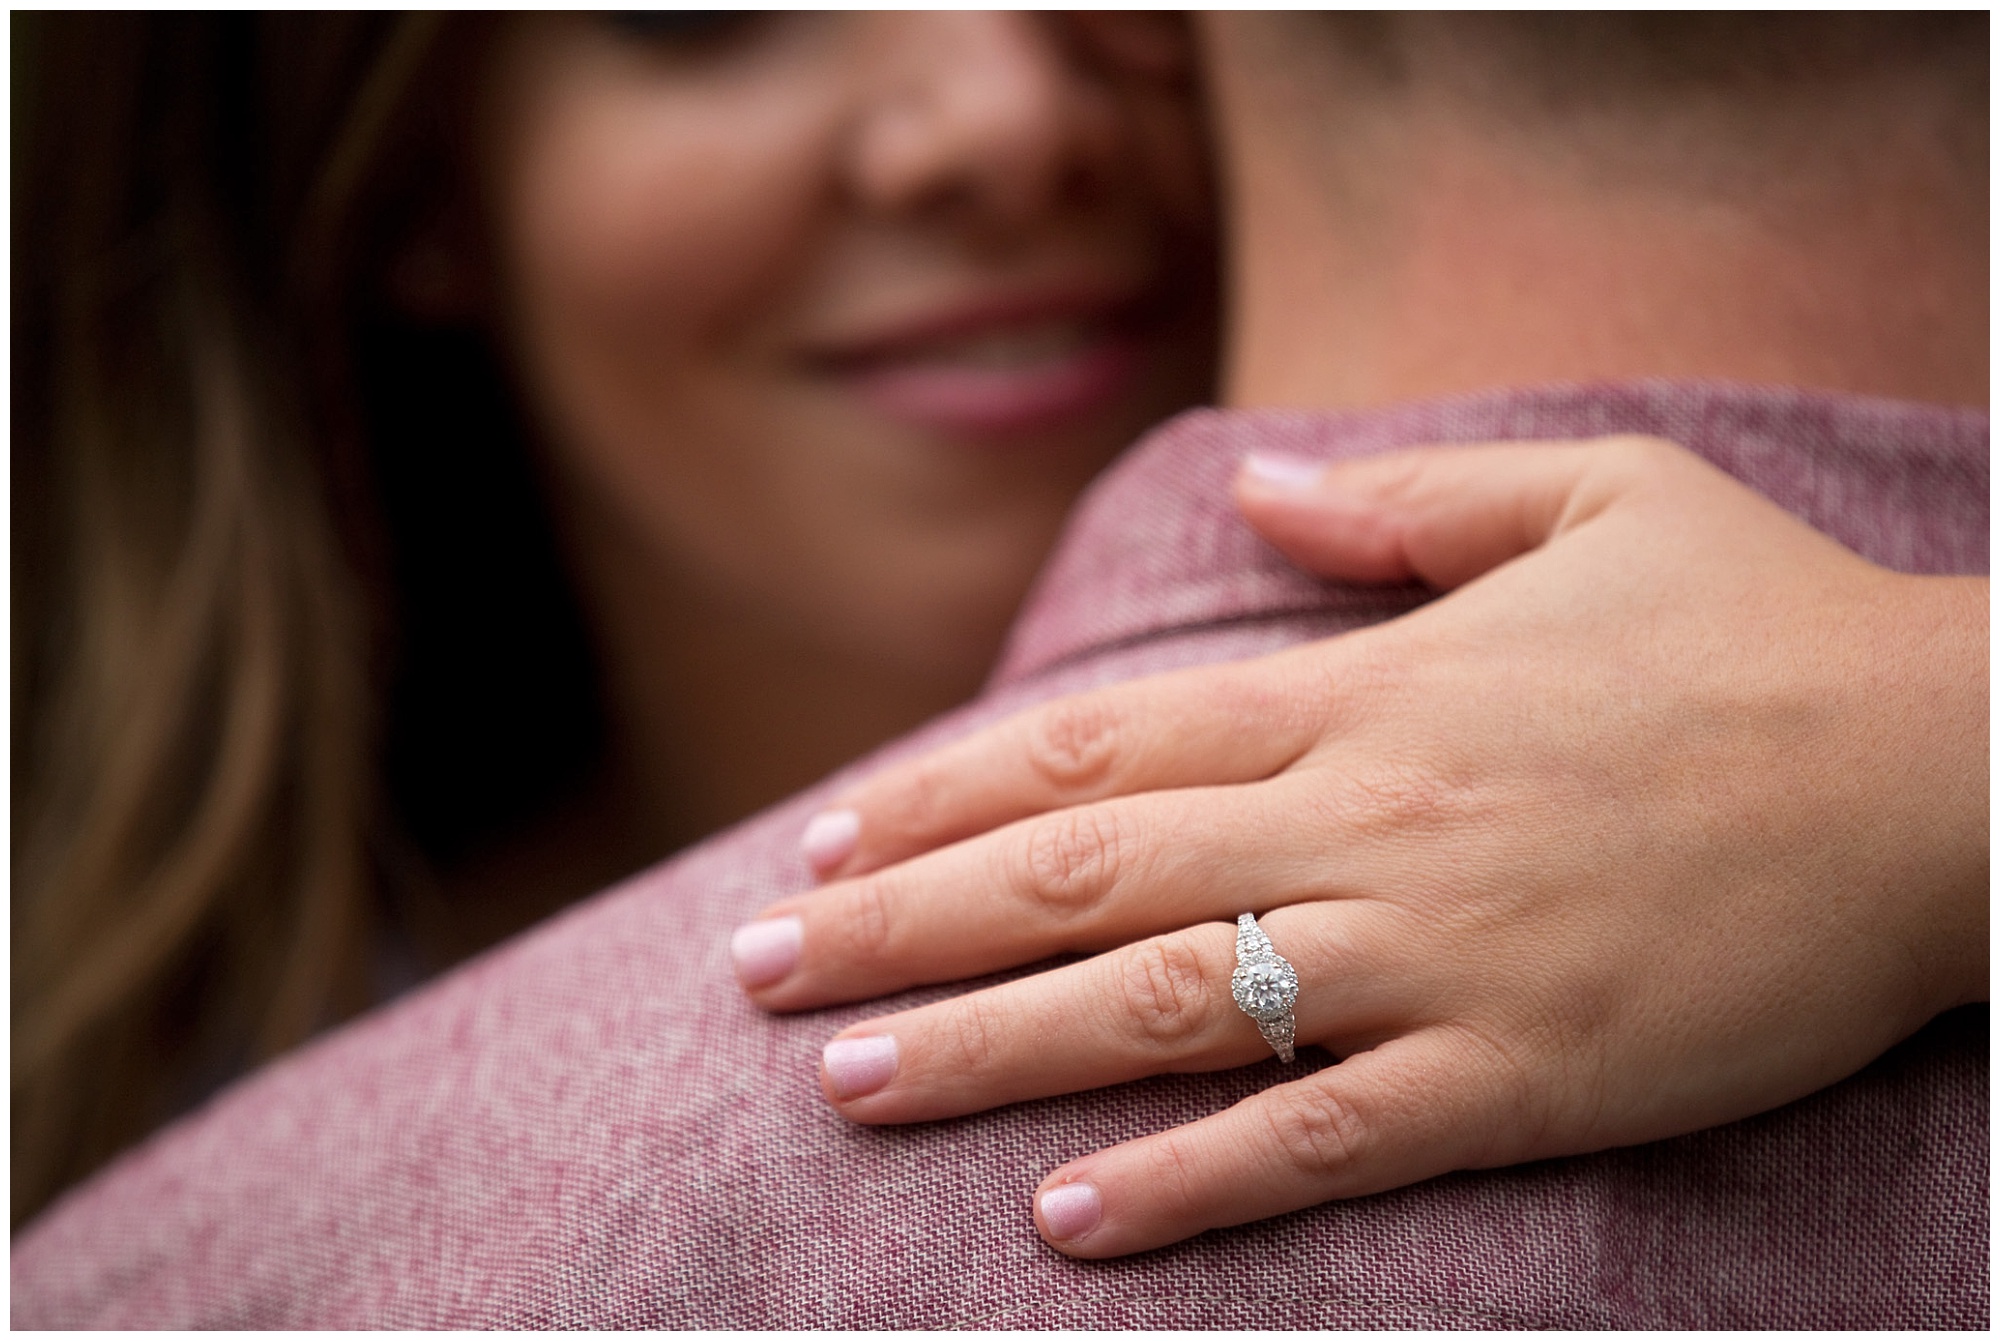 Photo of an engaged couple embracing with focus placed upon her engagment ring which is on his back..